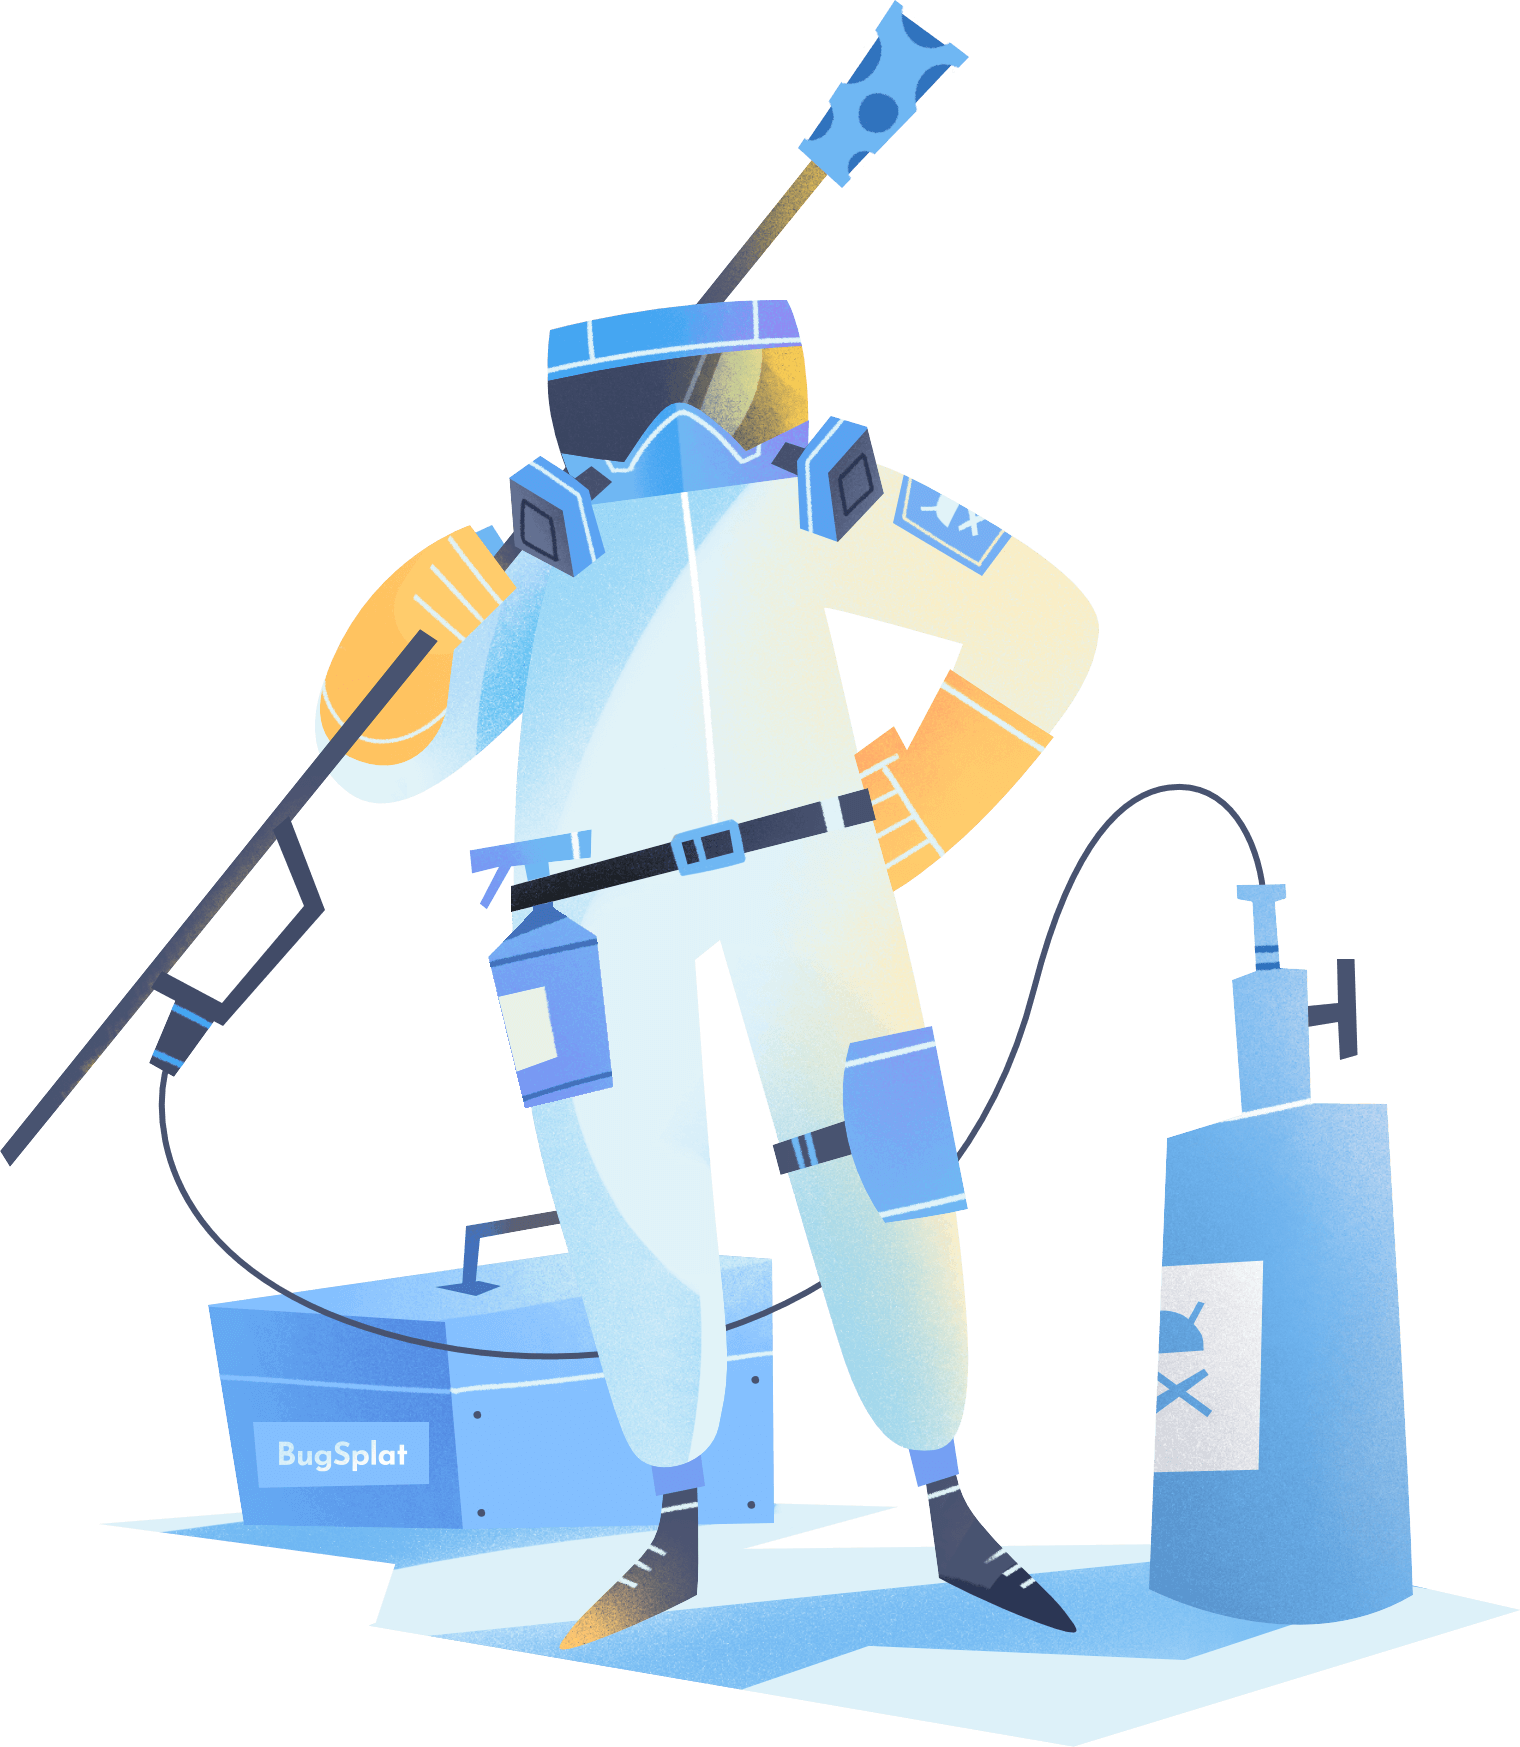 Find and fix your bugs exterminator